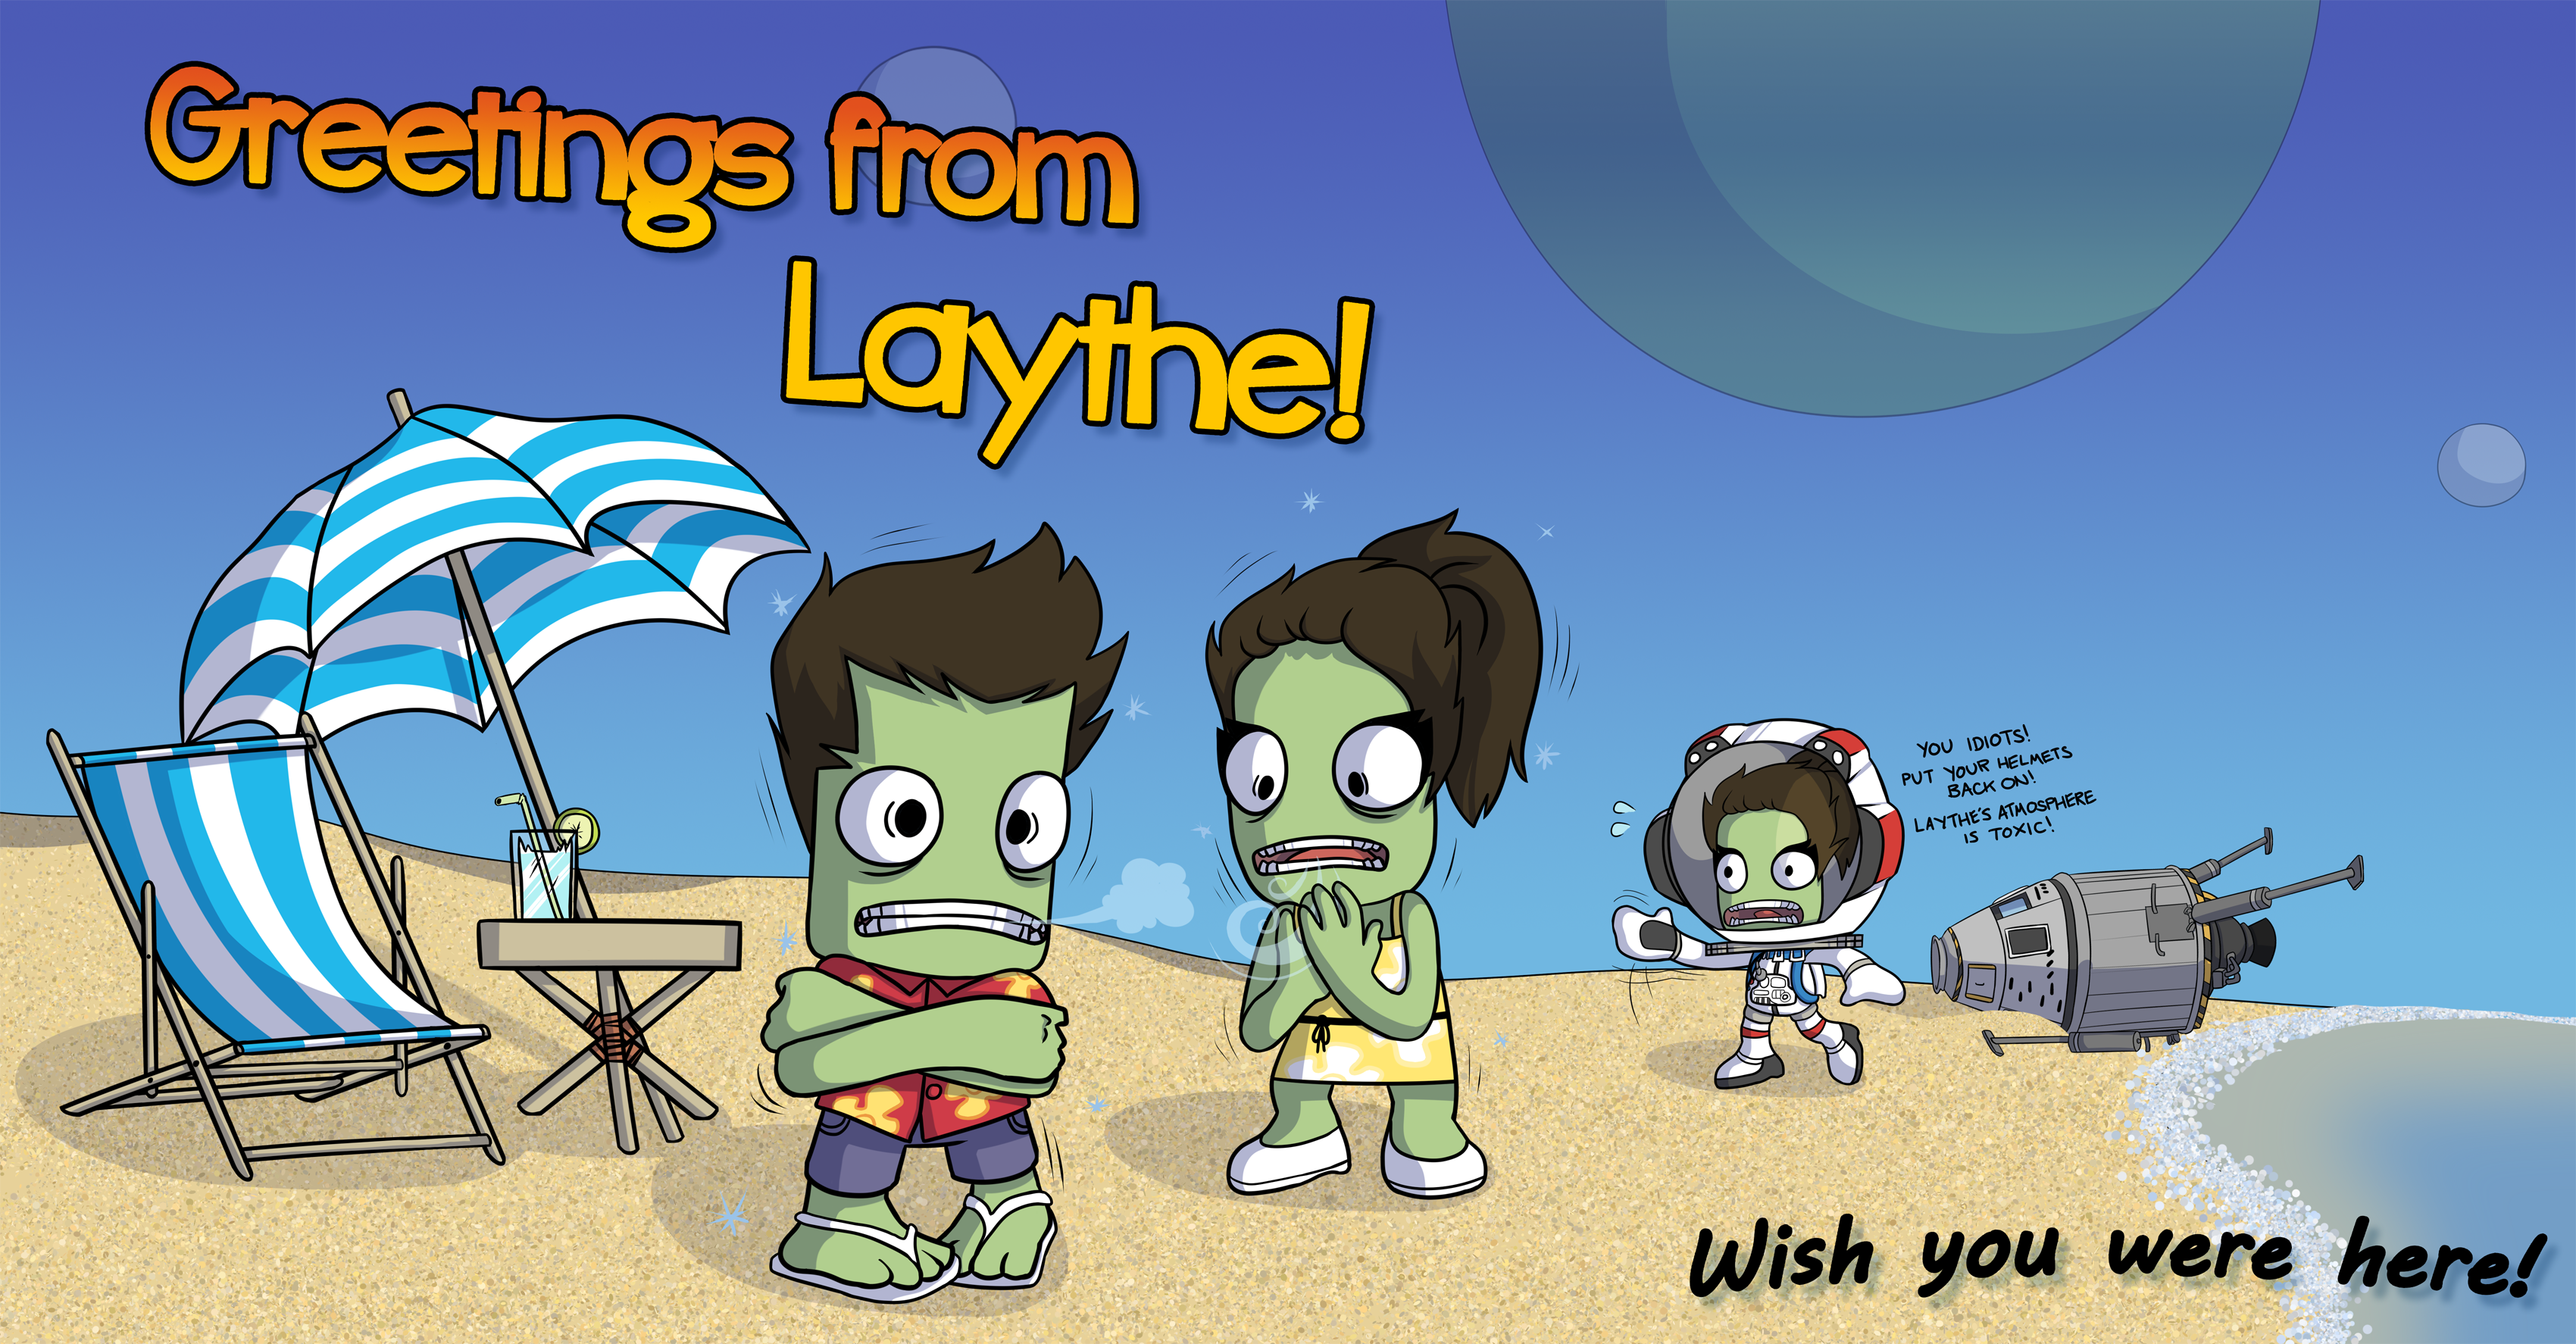 greetings_from_laythe__by_y0rshee-d8simbc.png